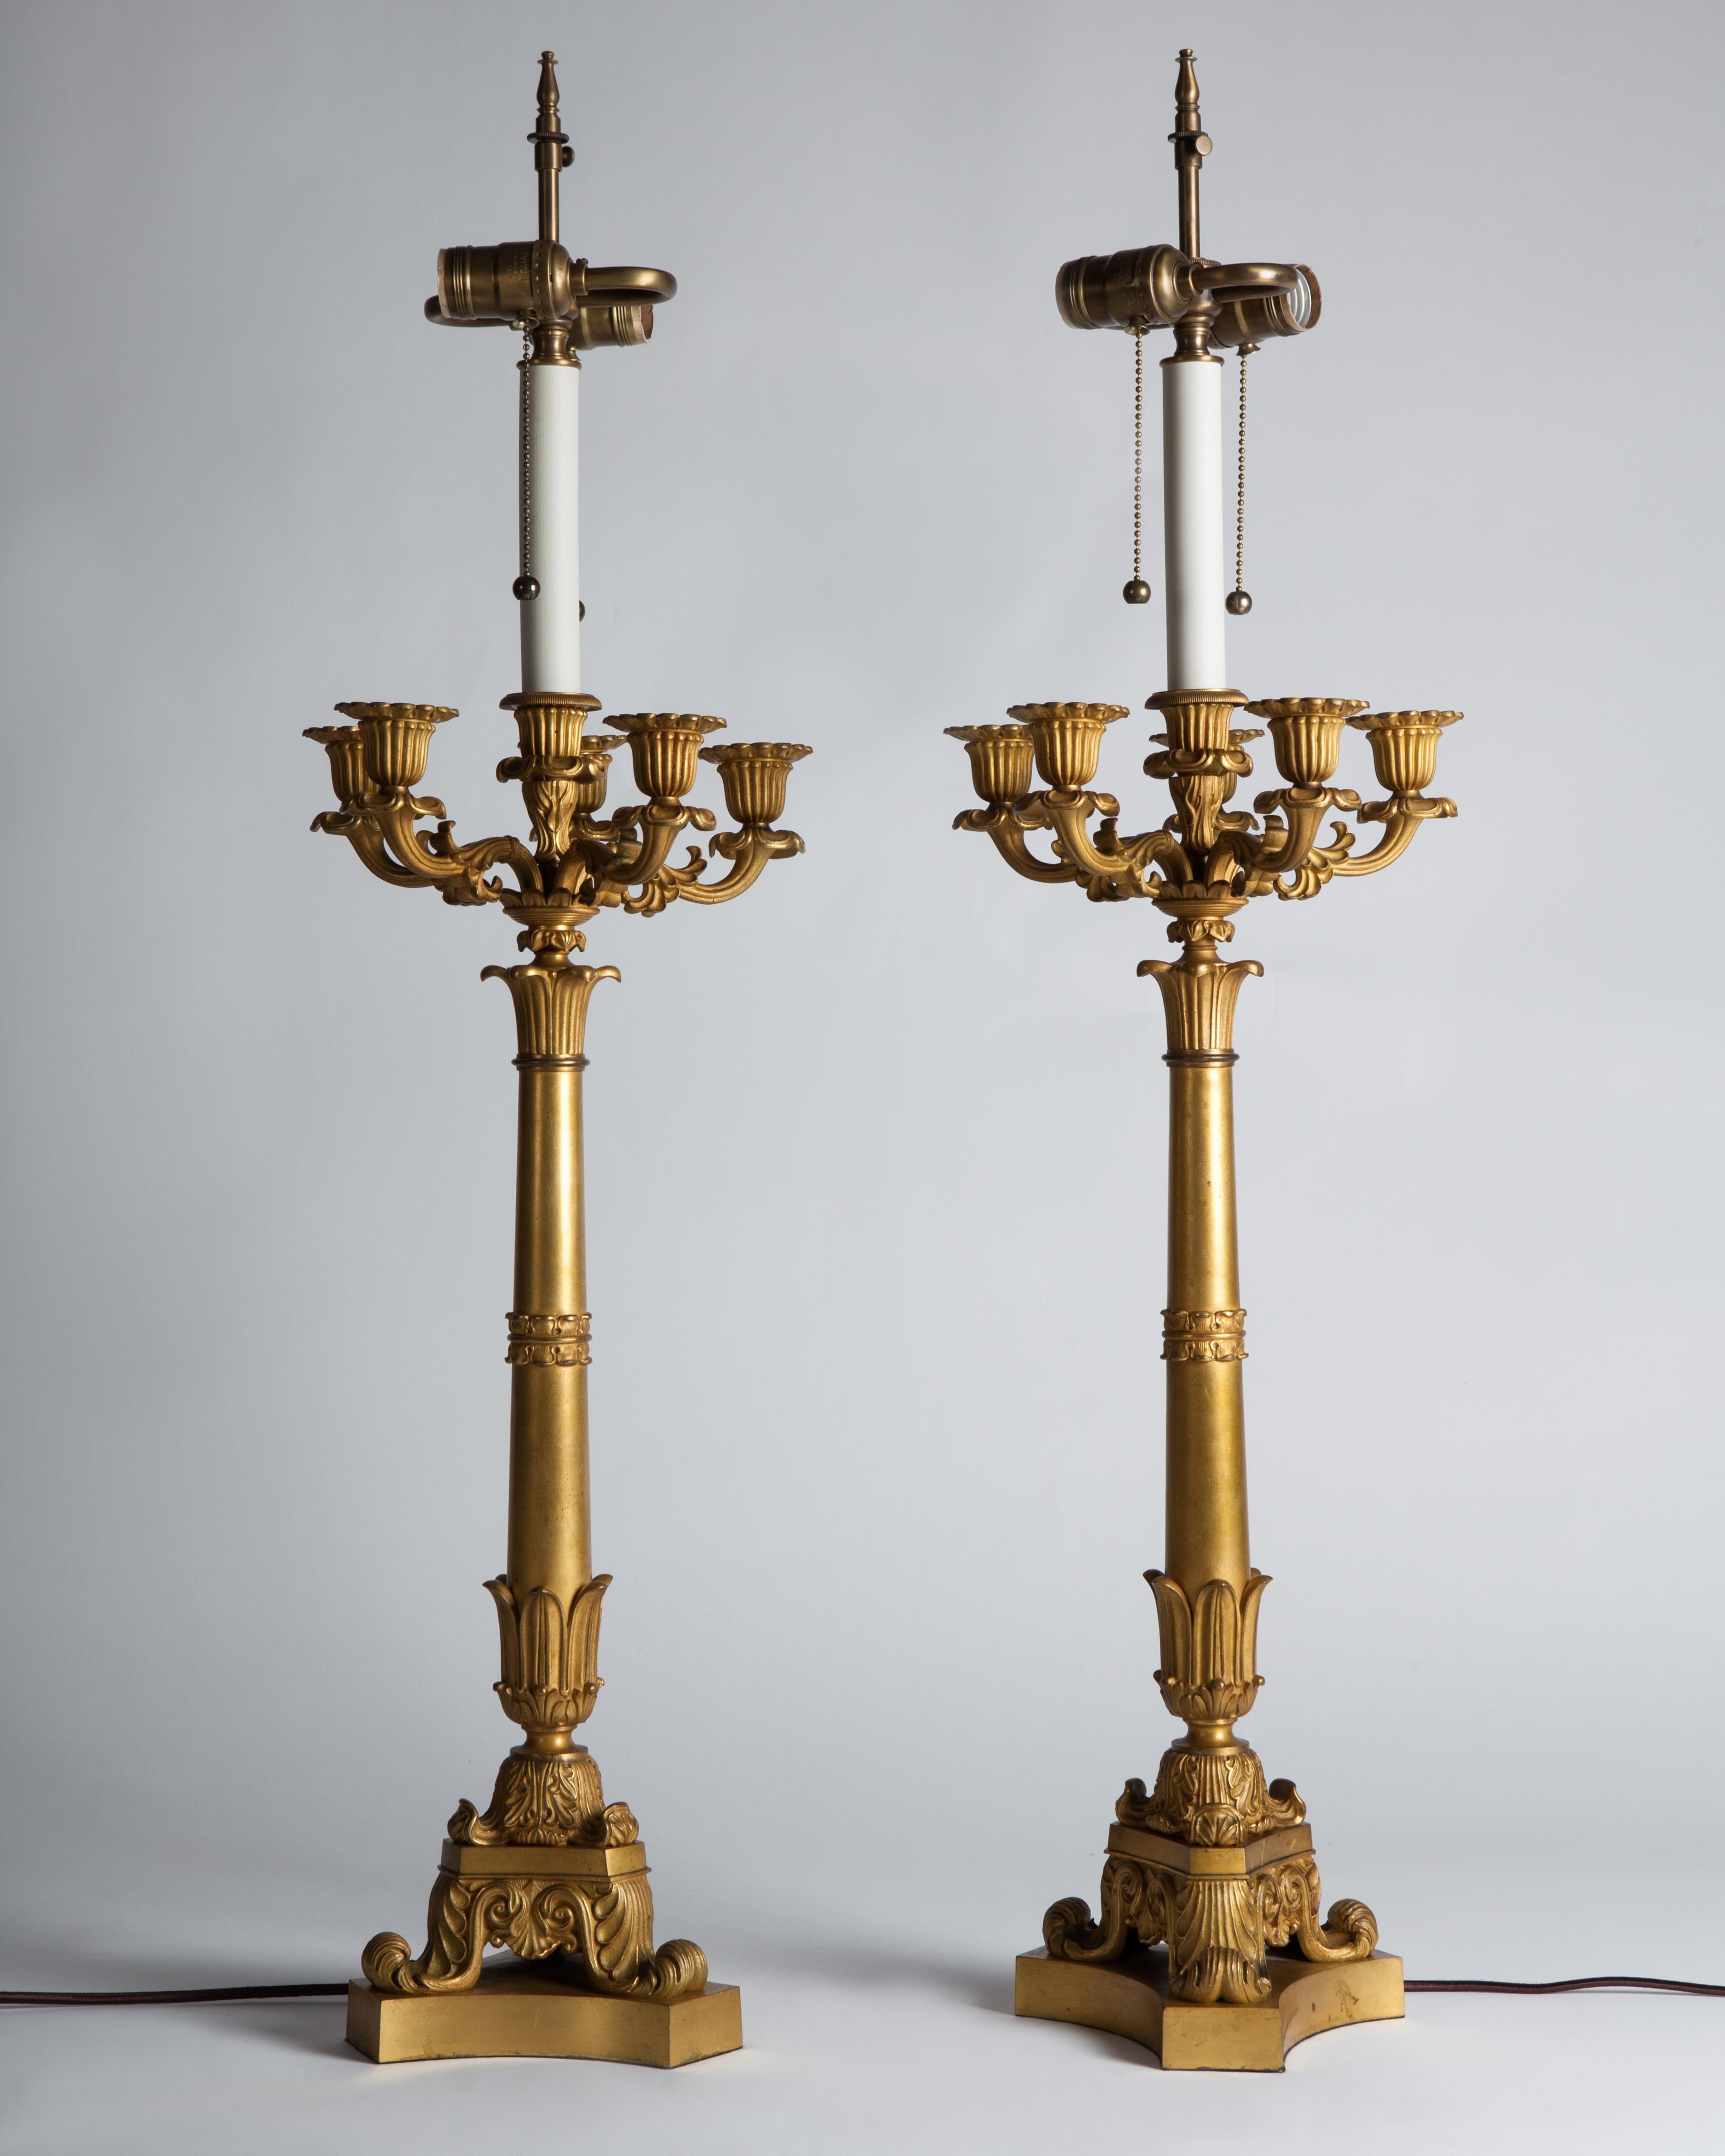 A pair of Egyptian Revival vintage bronze table lamps in their original very Fine gilded finish consisting of a tripod base holding a column crowned with six foliate arms, circa 1840. Converted to electricity in the 20th